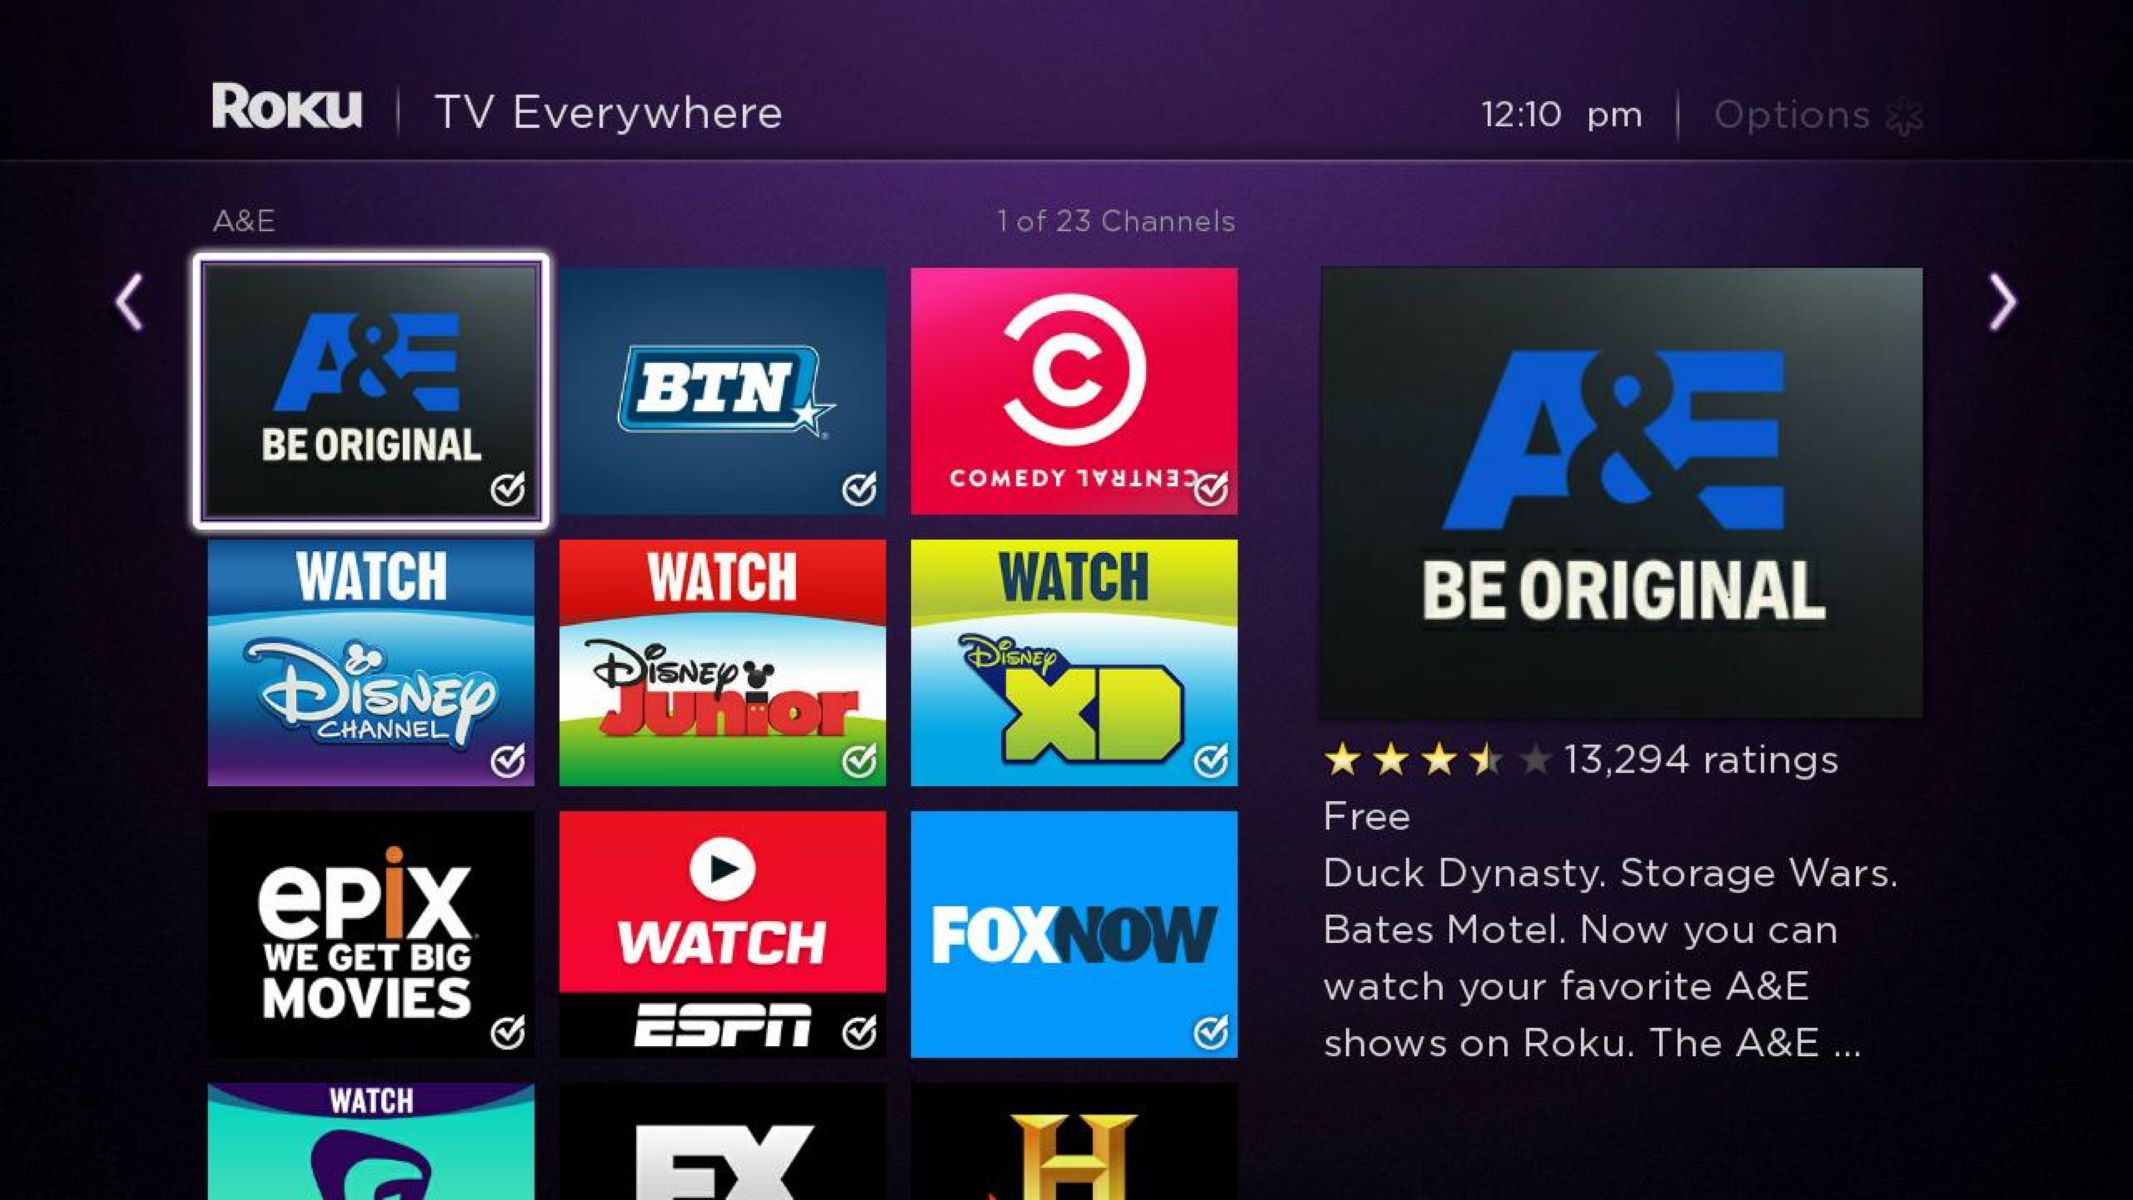 How To Watch Movies On Roku | CitizenSide